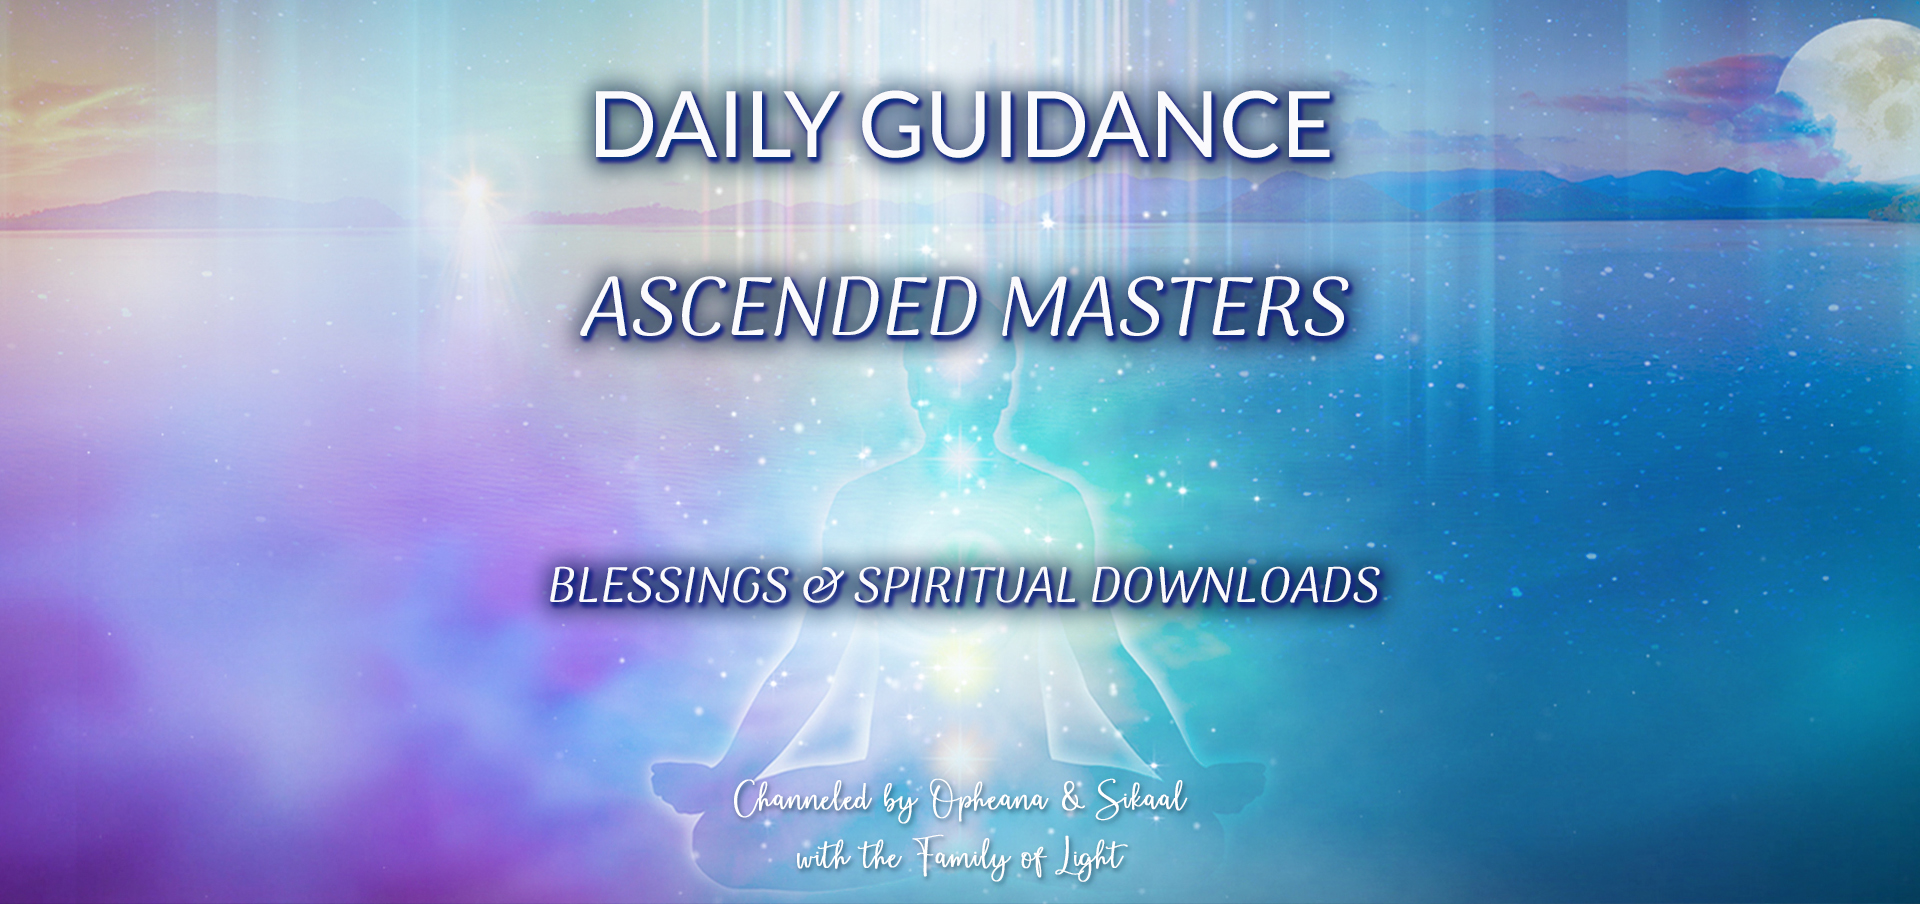 Daily Guidance ~ Blessings & Spiritual Downloads ~ Ascended Masters ~ Monday 6 February 2023